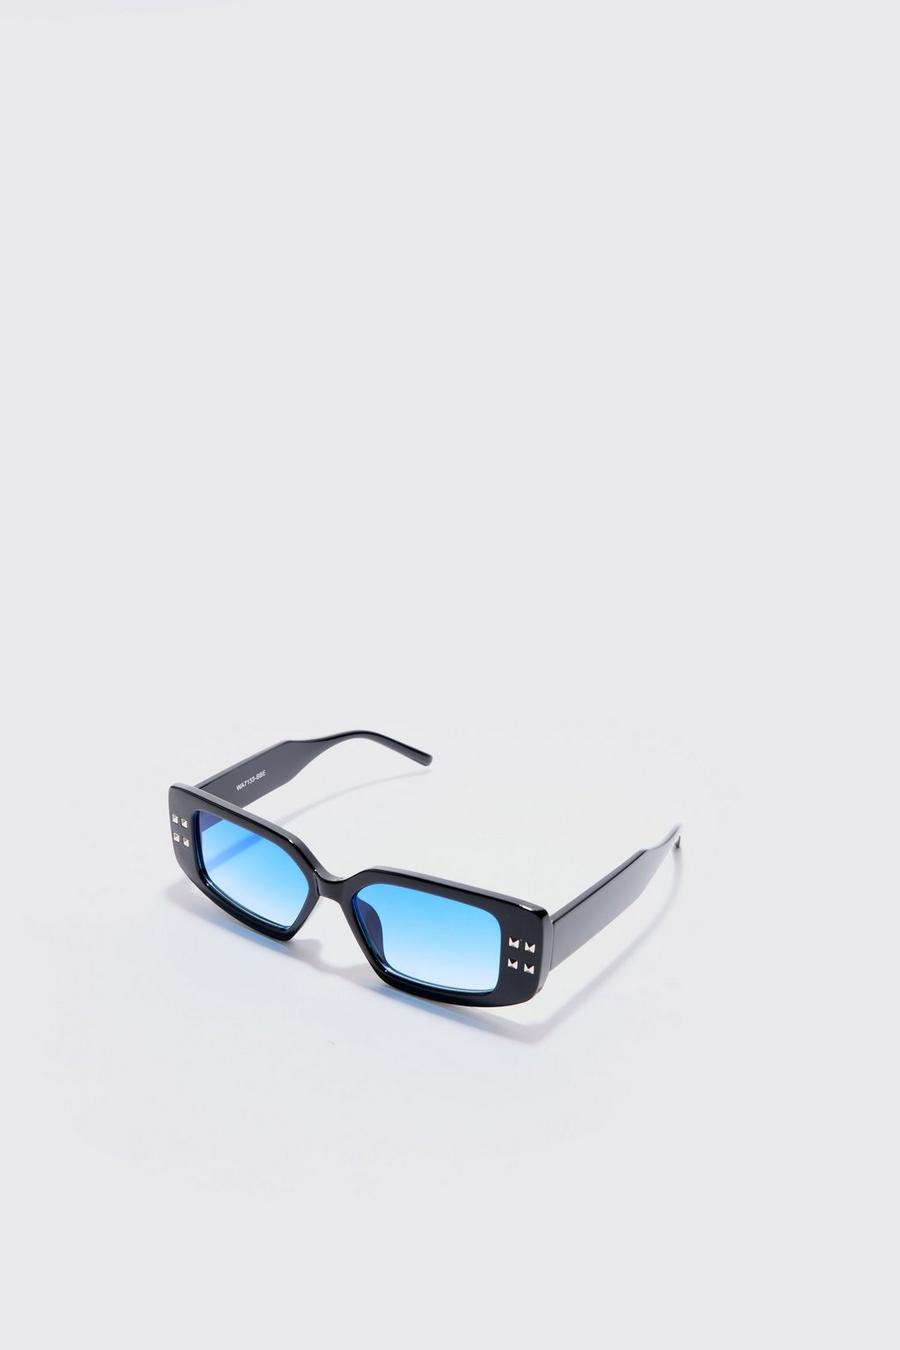 Chunky Rectangle Sunglasses With Blue Lens In Black